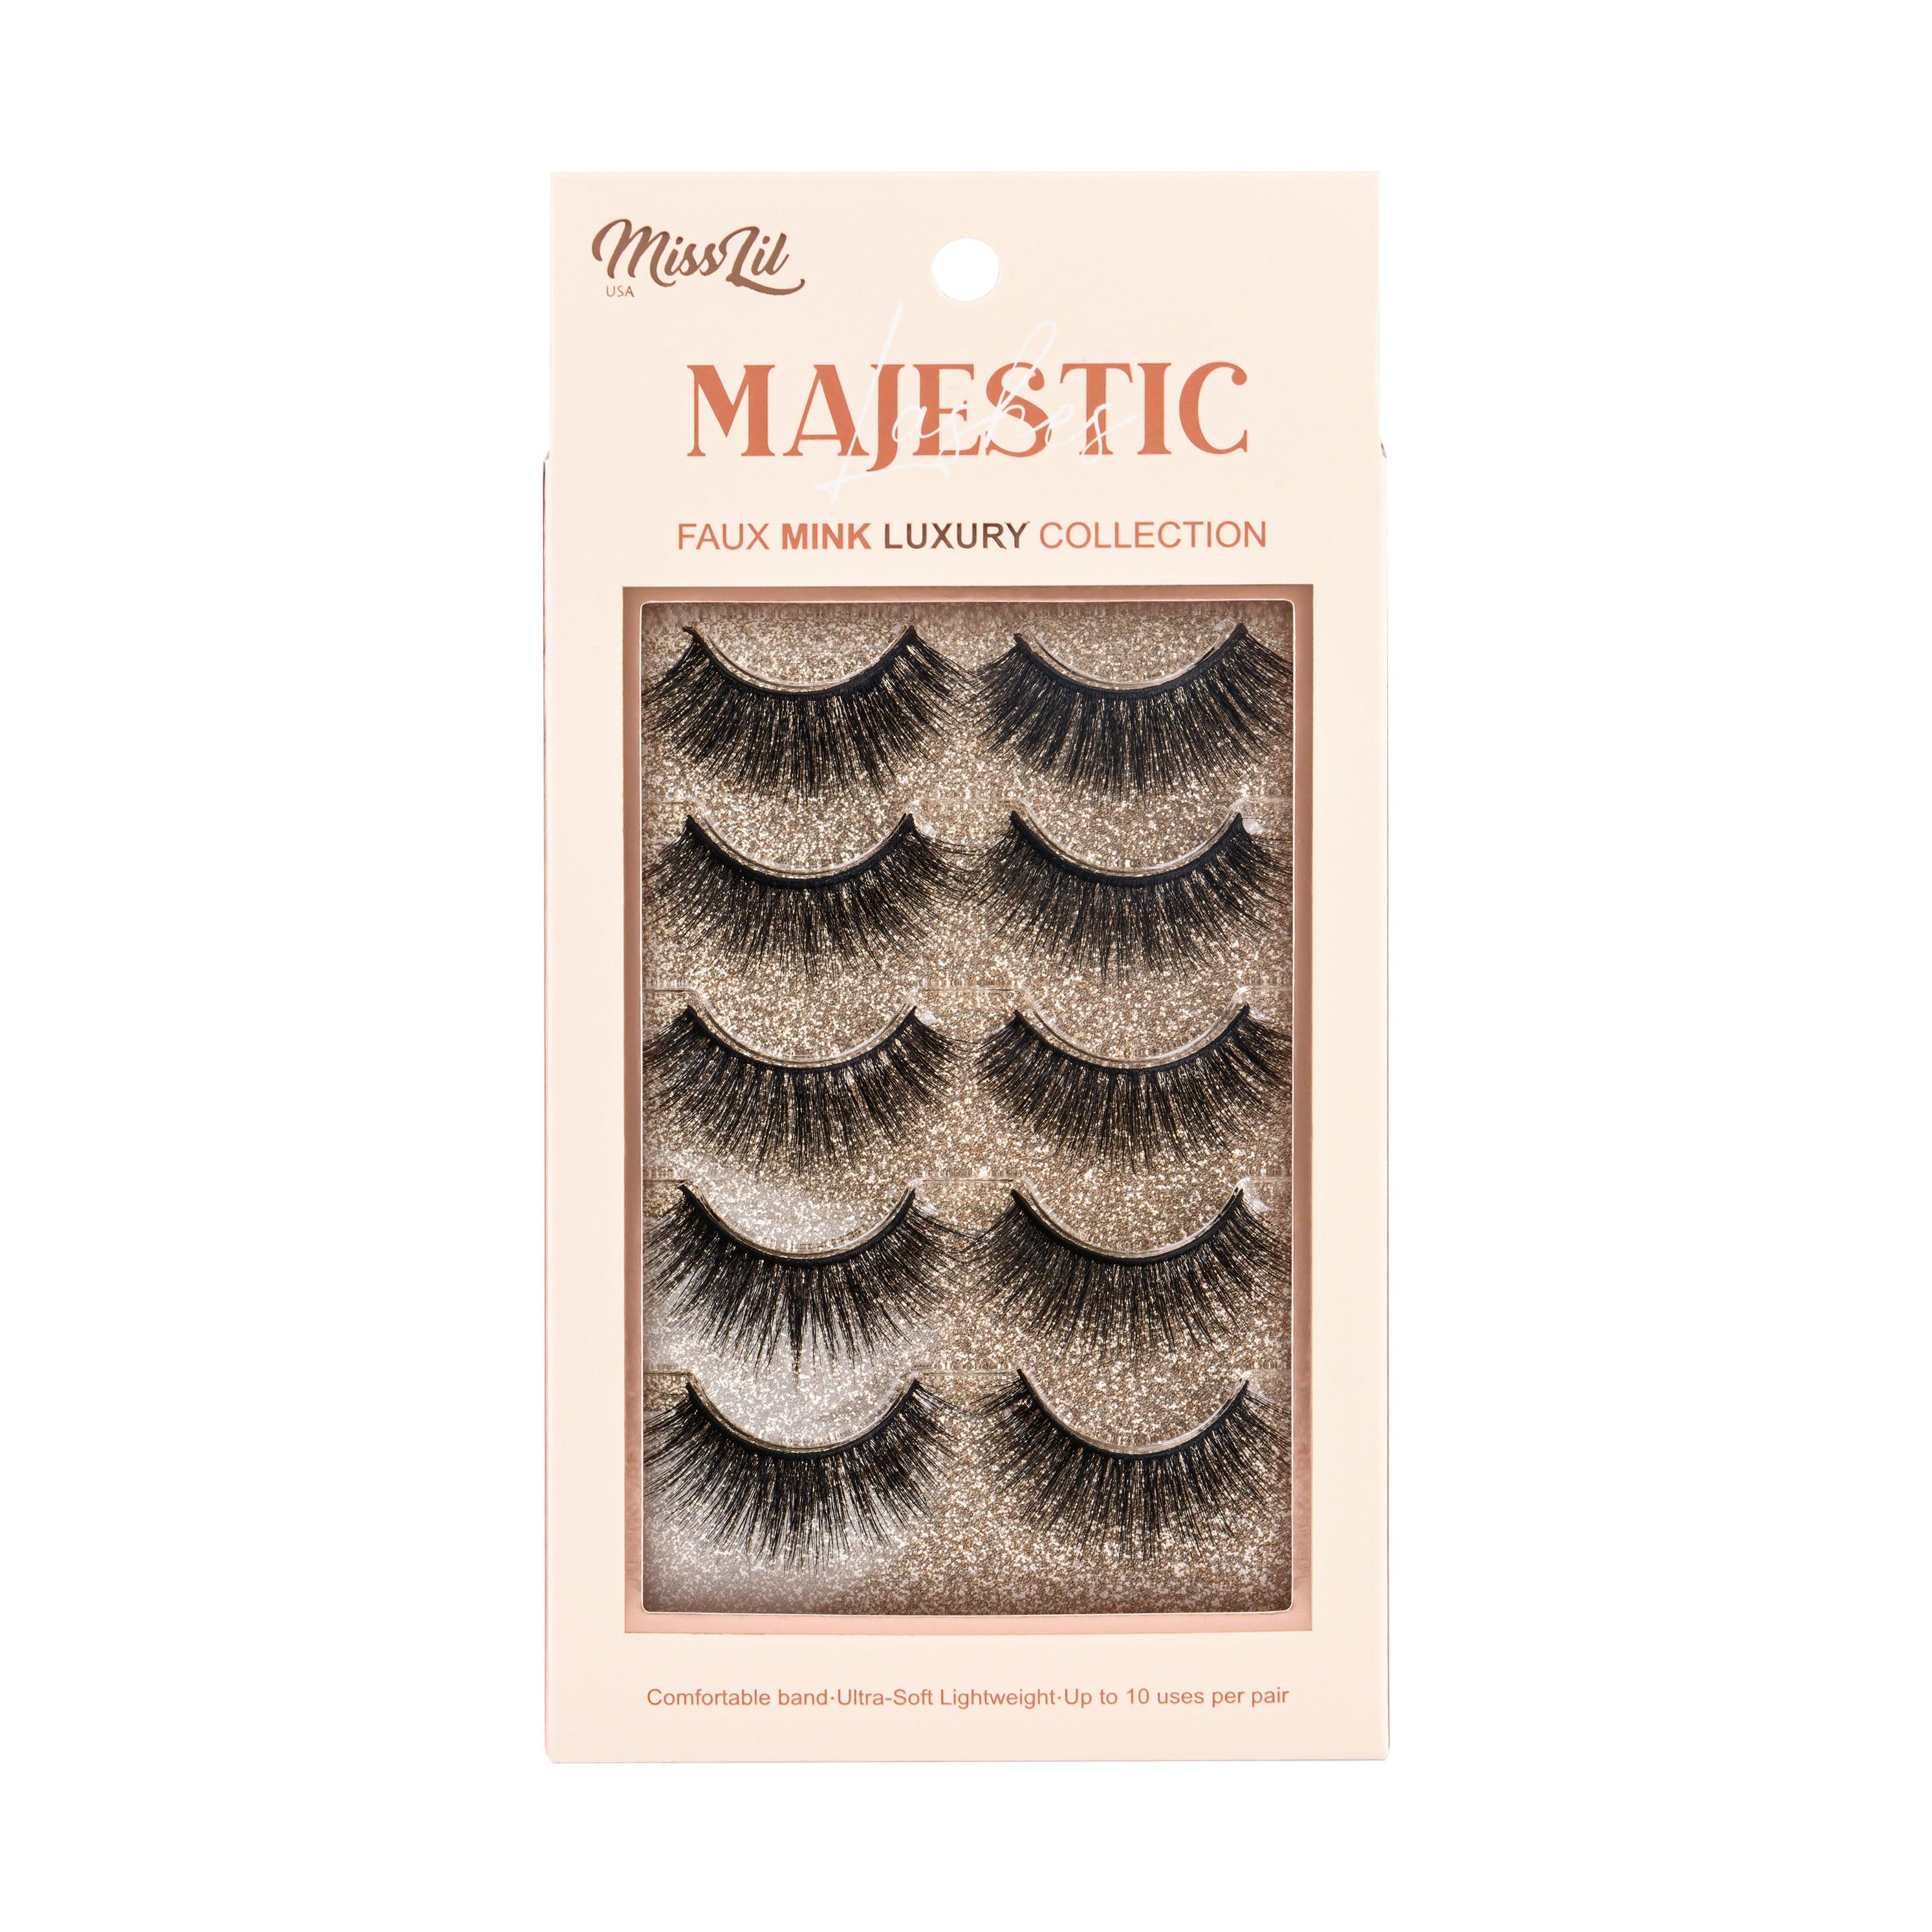 5 Pairs Majestic Lashes #9 (Pack of 6) - Miss Lil USA Wholesale